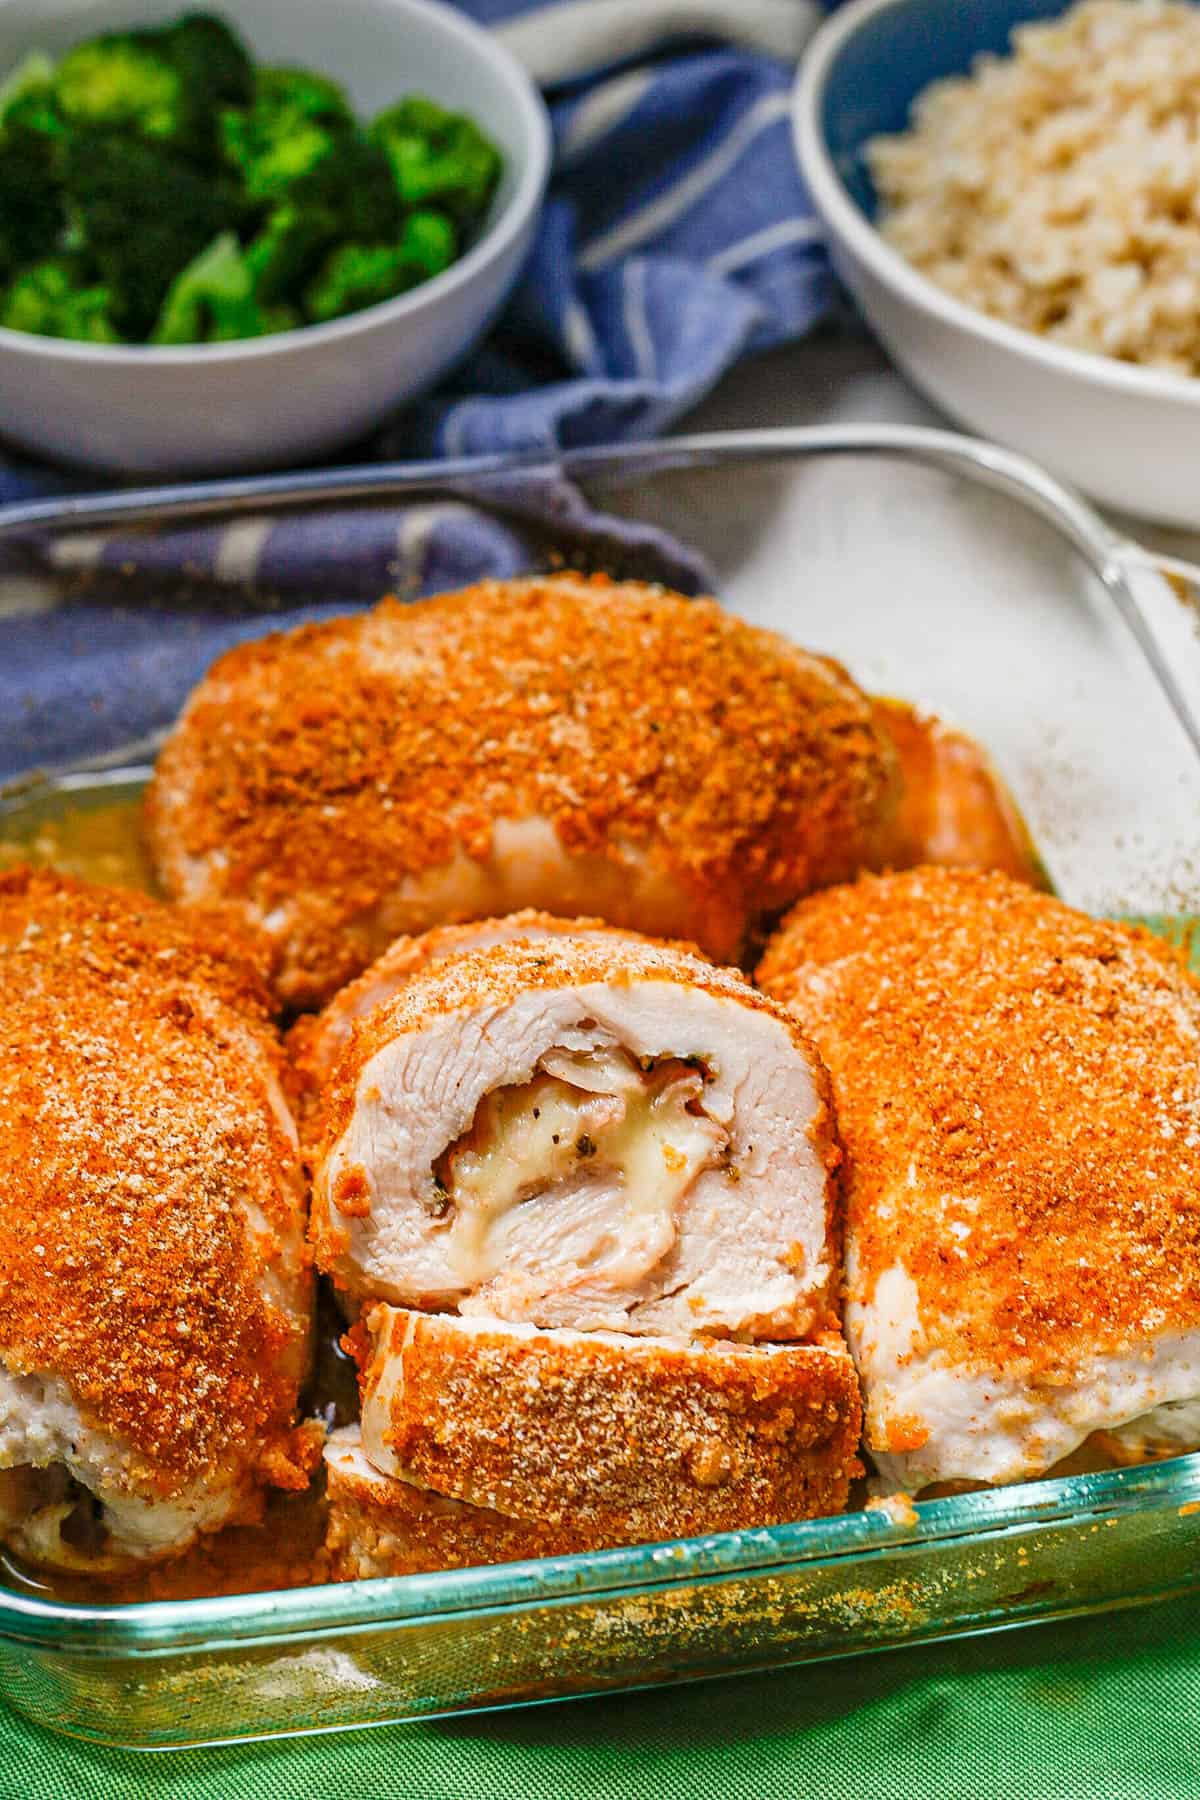 A glass casserole dish with baked chicken cordon bleu with one sliced to show the inside stuffing.